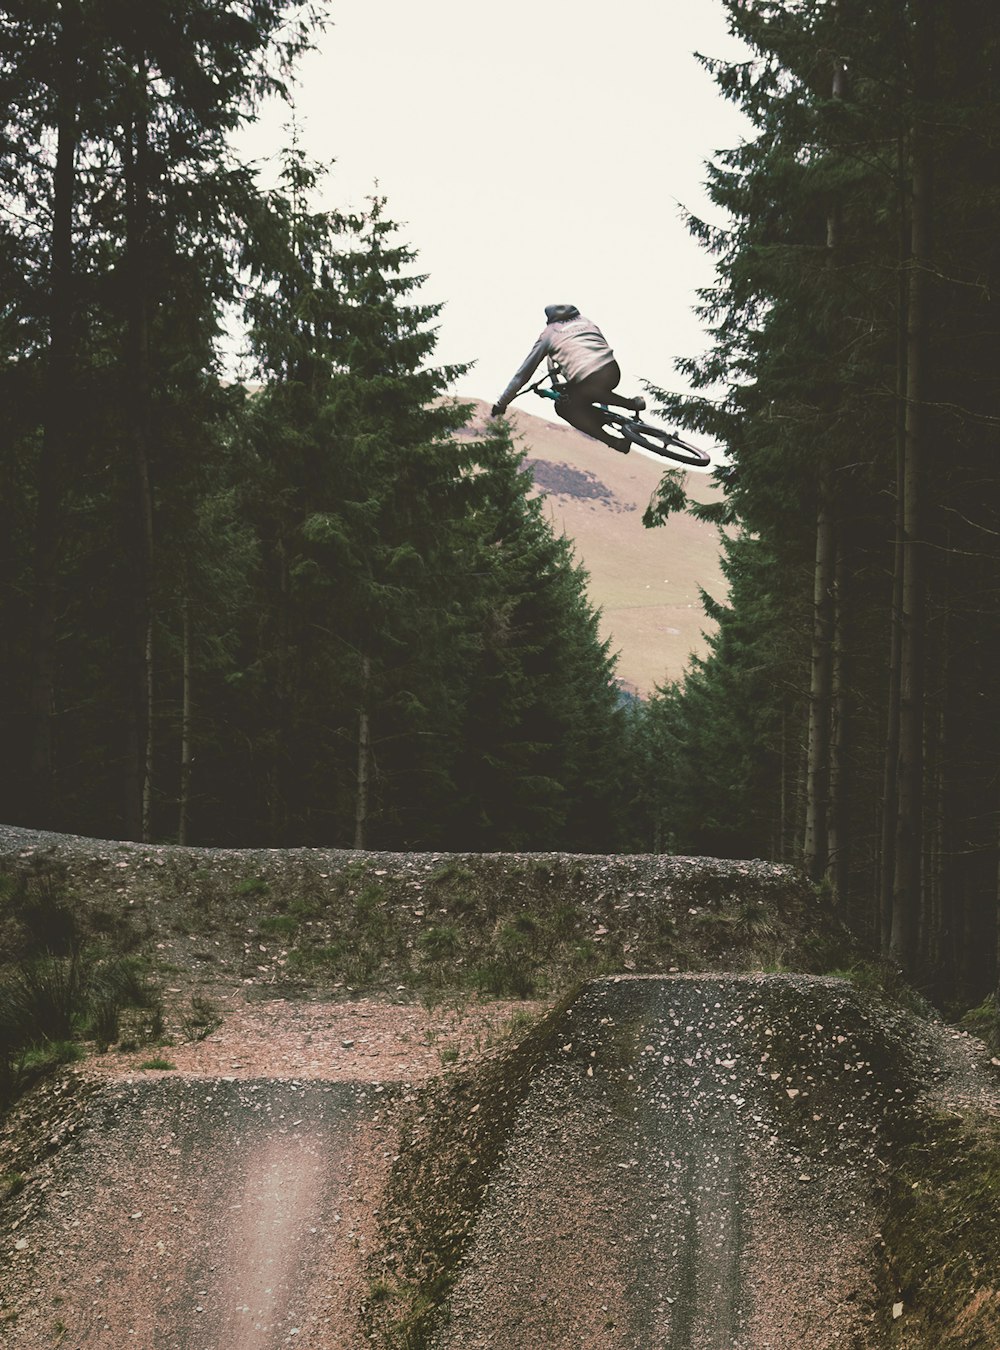 Downhill Mountain Biking Pictures | Download Free Images on Unsplash